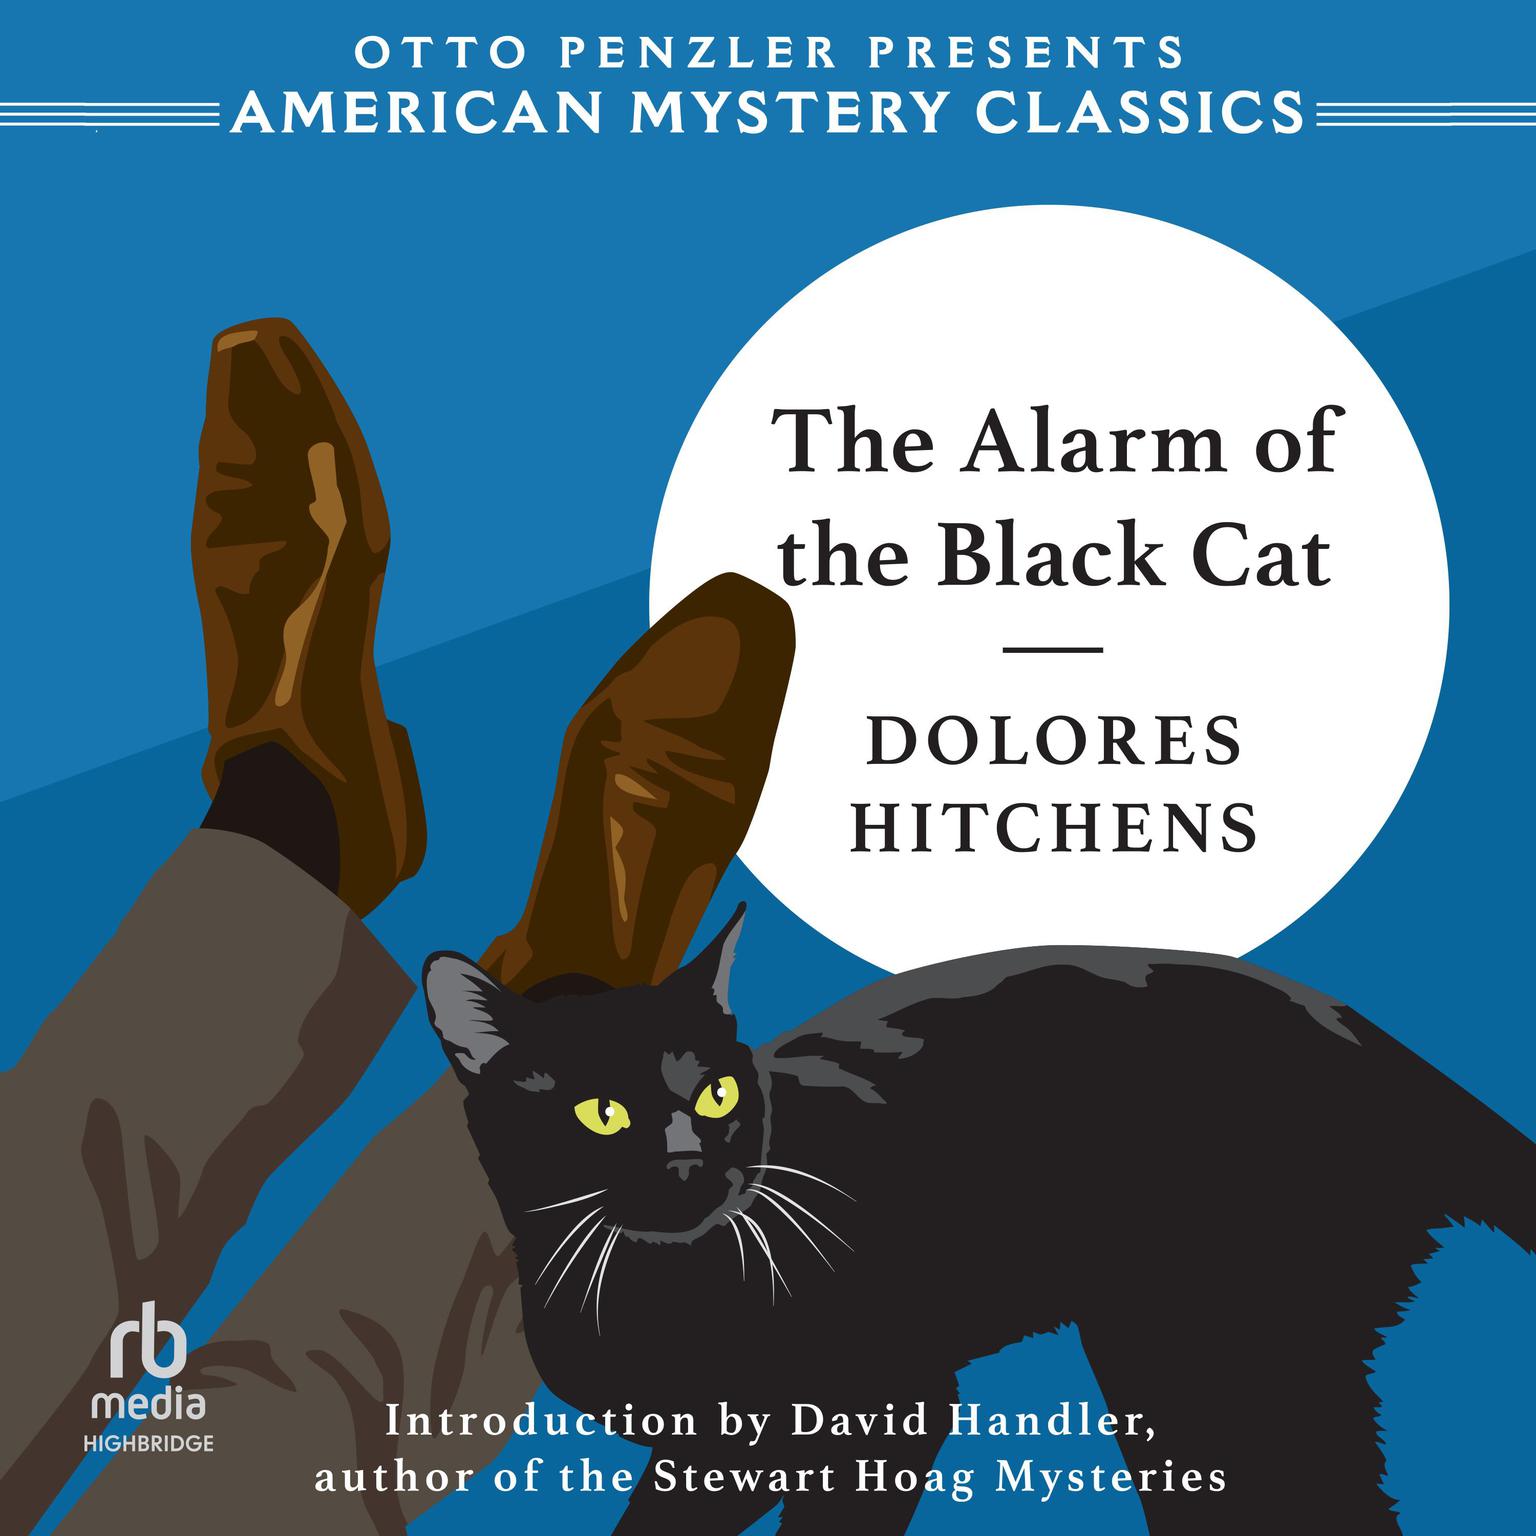 The Alarm of the Black Cat Audiobook, by Dolores Hitchens